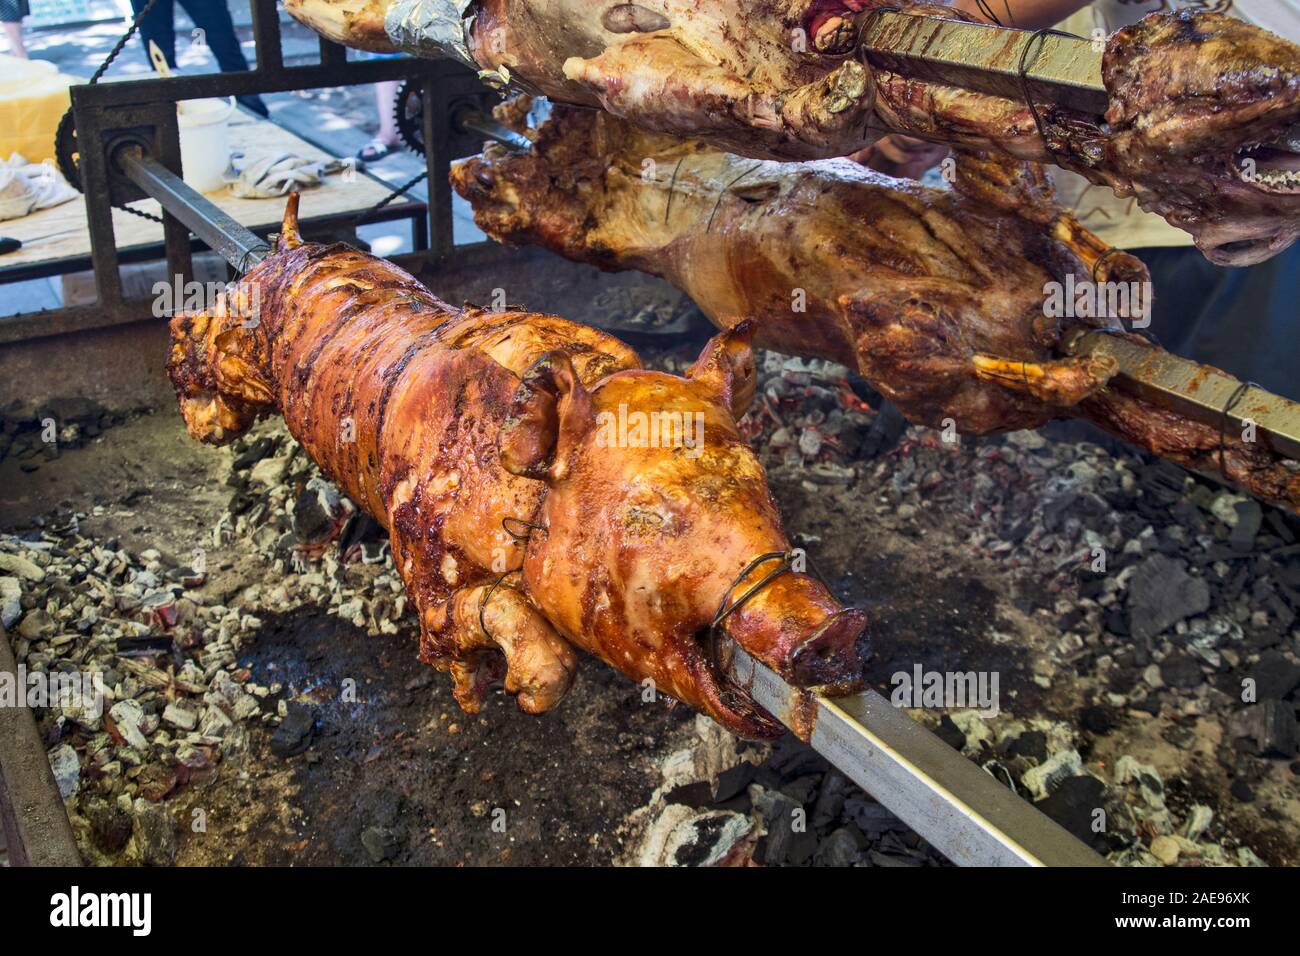 A nice roasted grilled pig on a skewer before selling to customers at the restaurant. Stock Photo